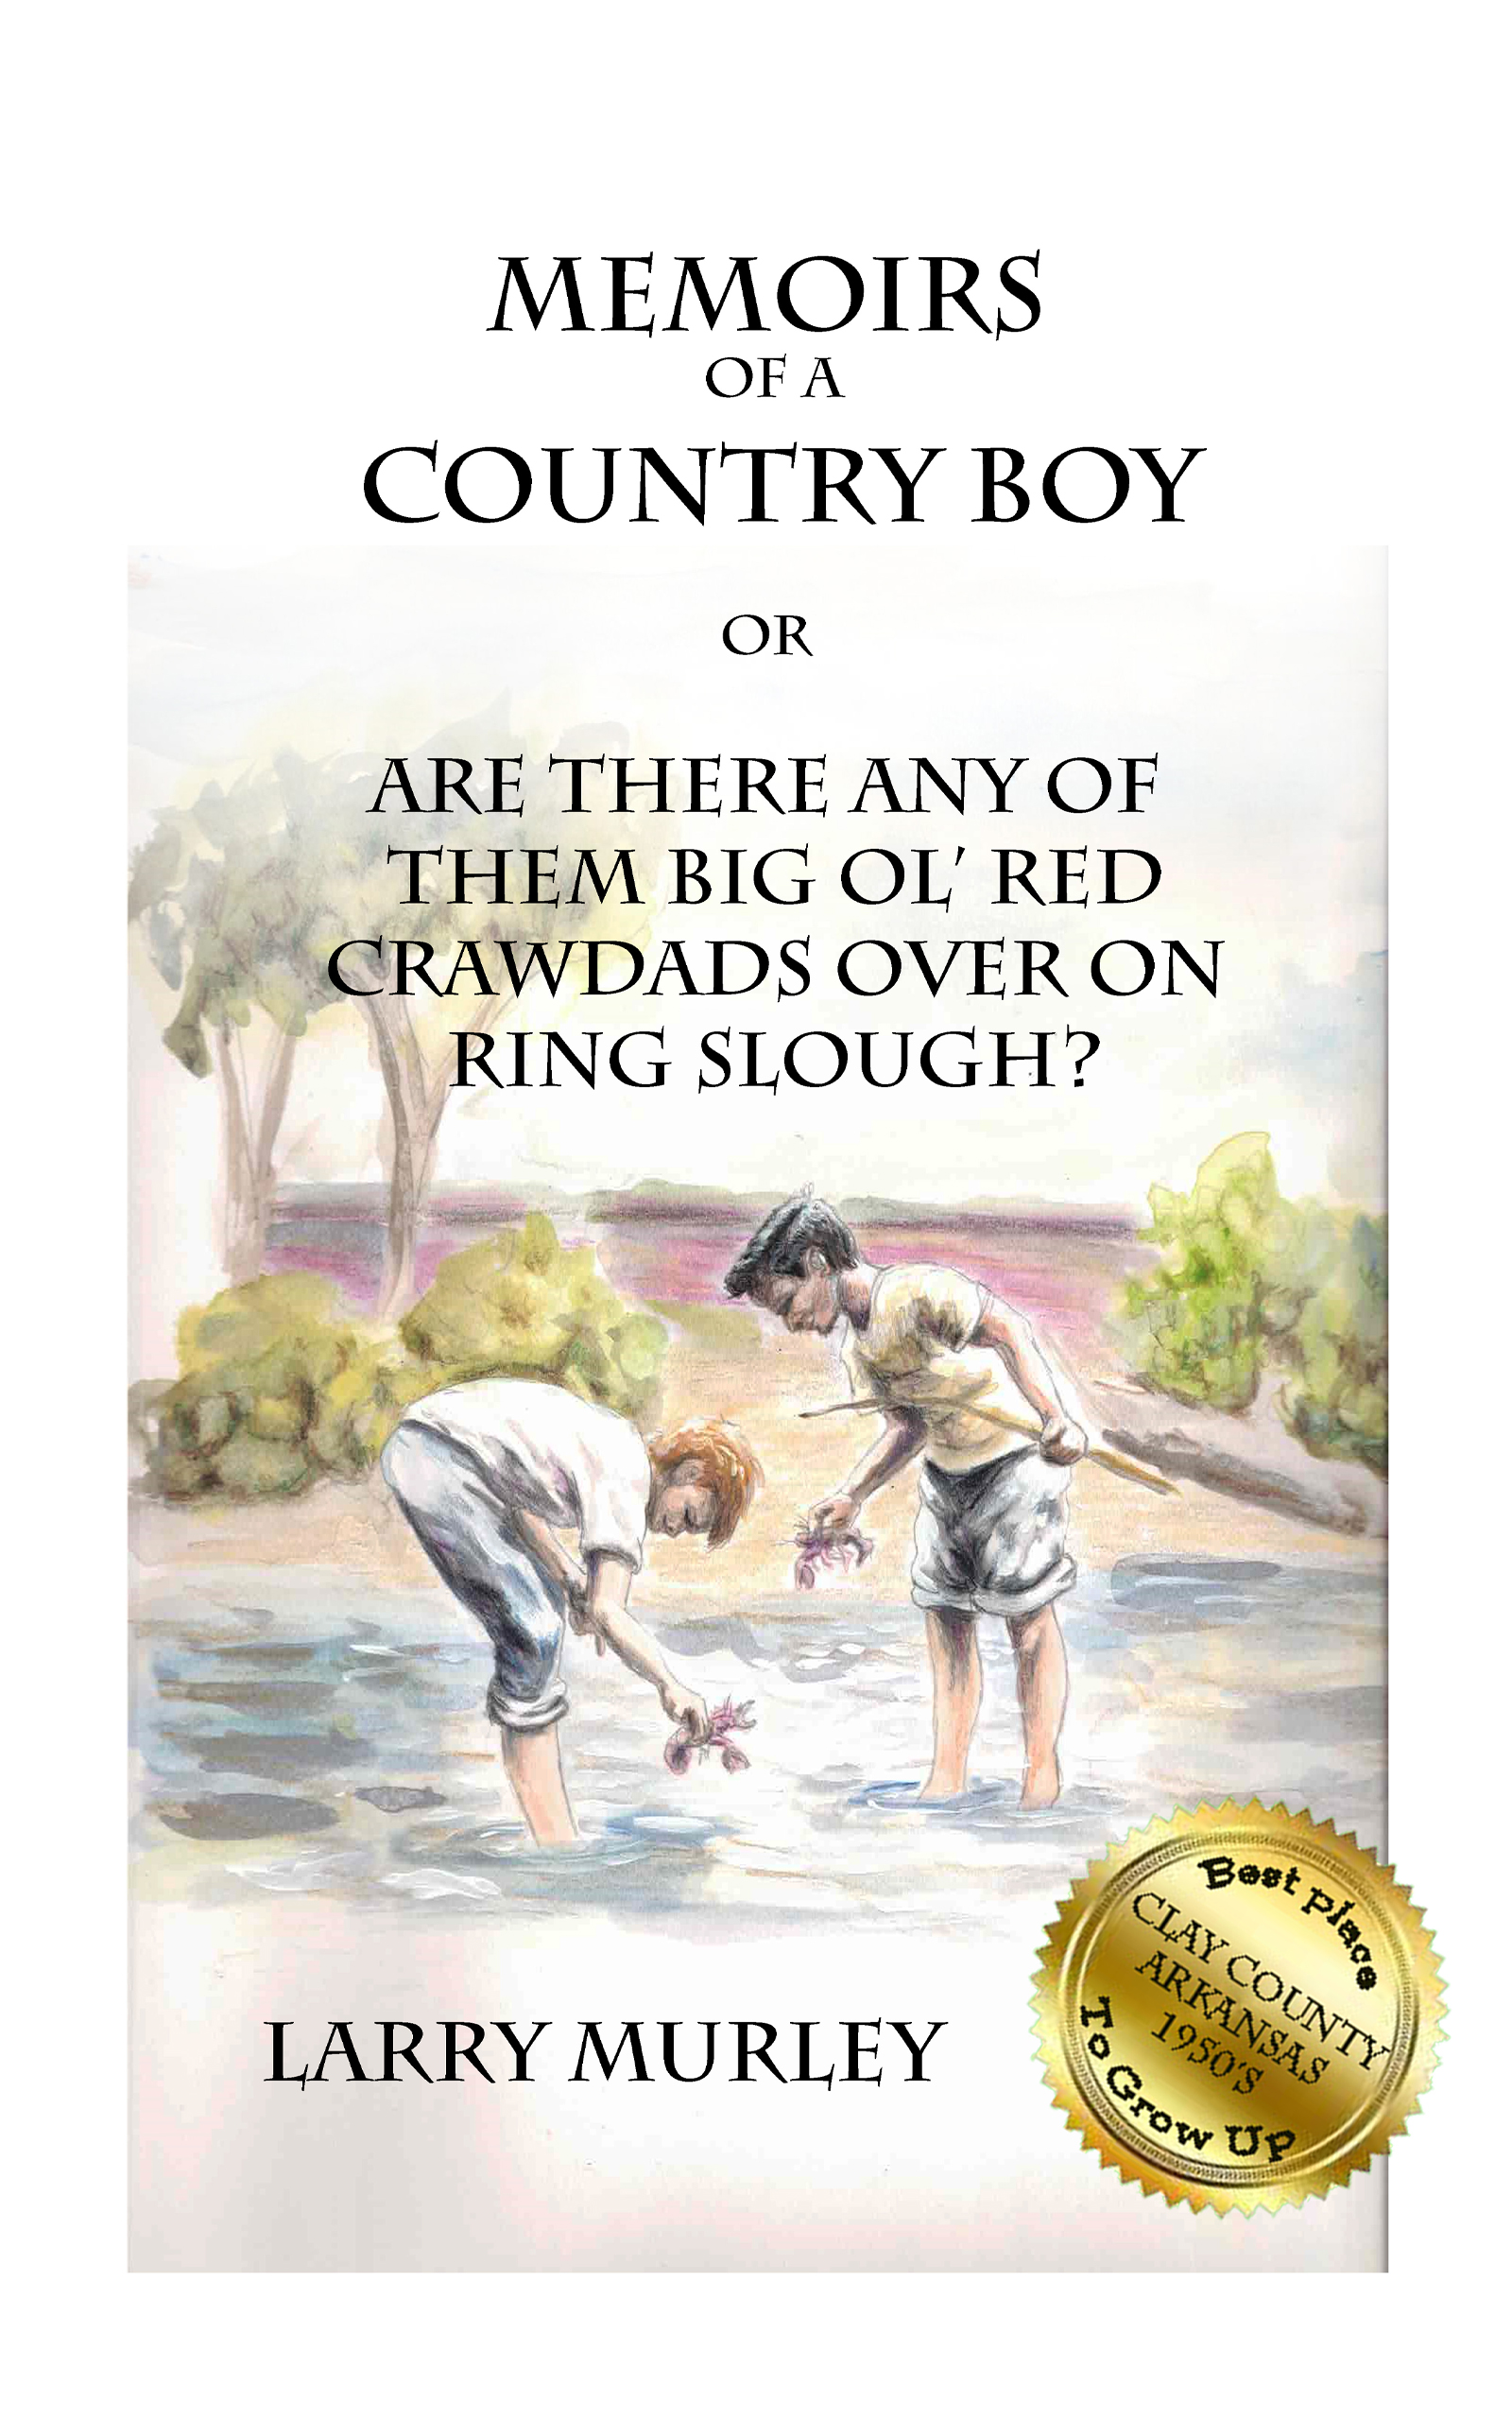 Memiors of a Country Boy - or, Are There Any of Them Big Ol' Red Crawdads Over on Ring Slough? - A Novel by Larry Murley